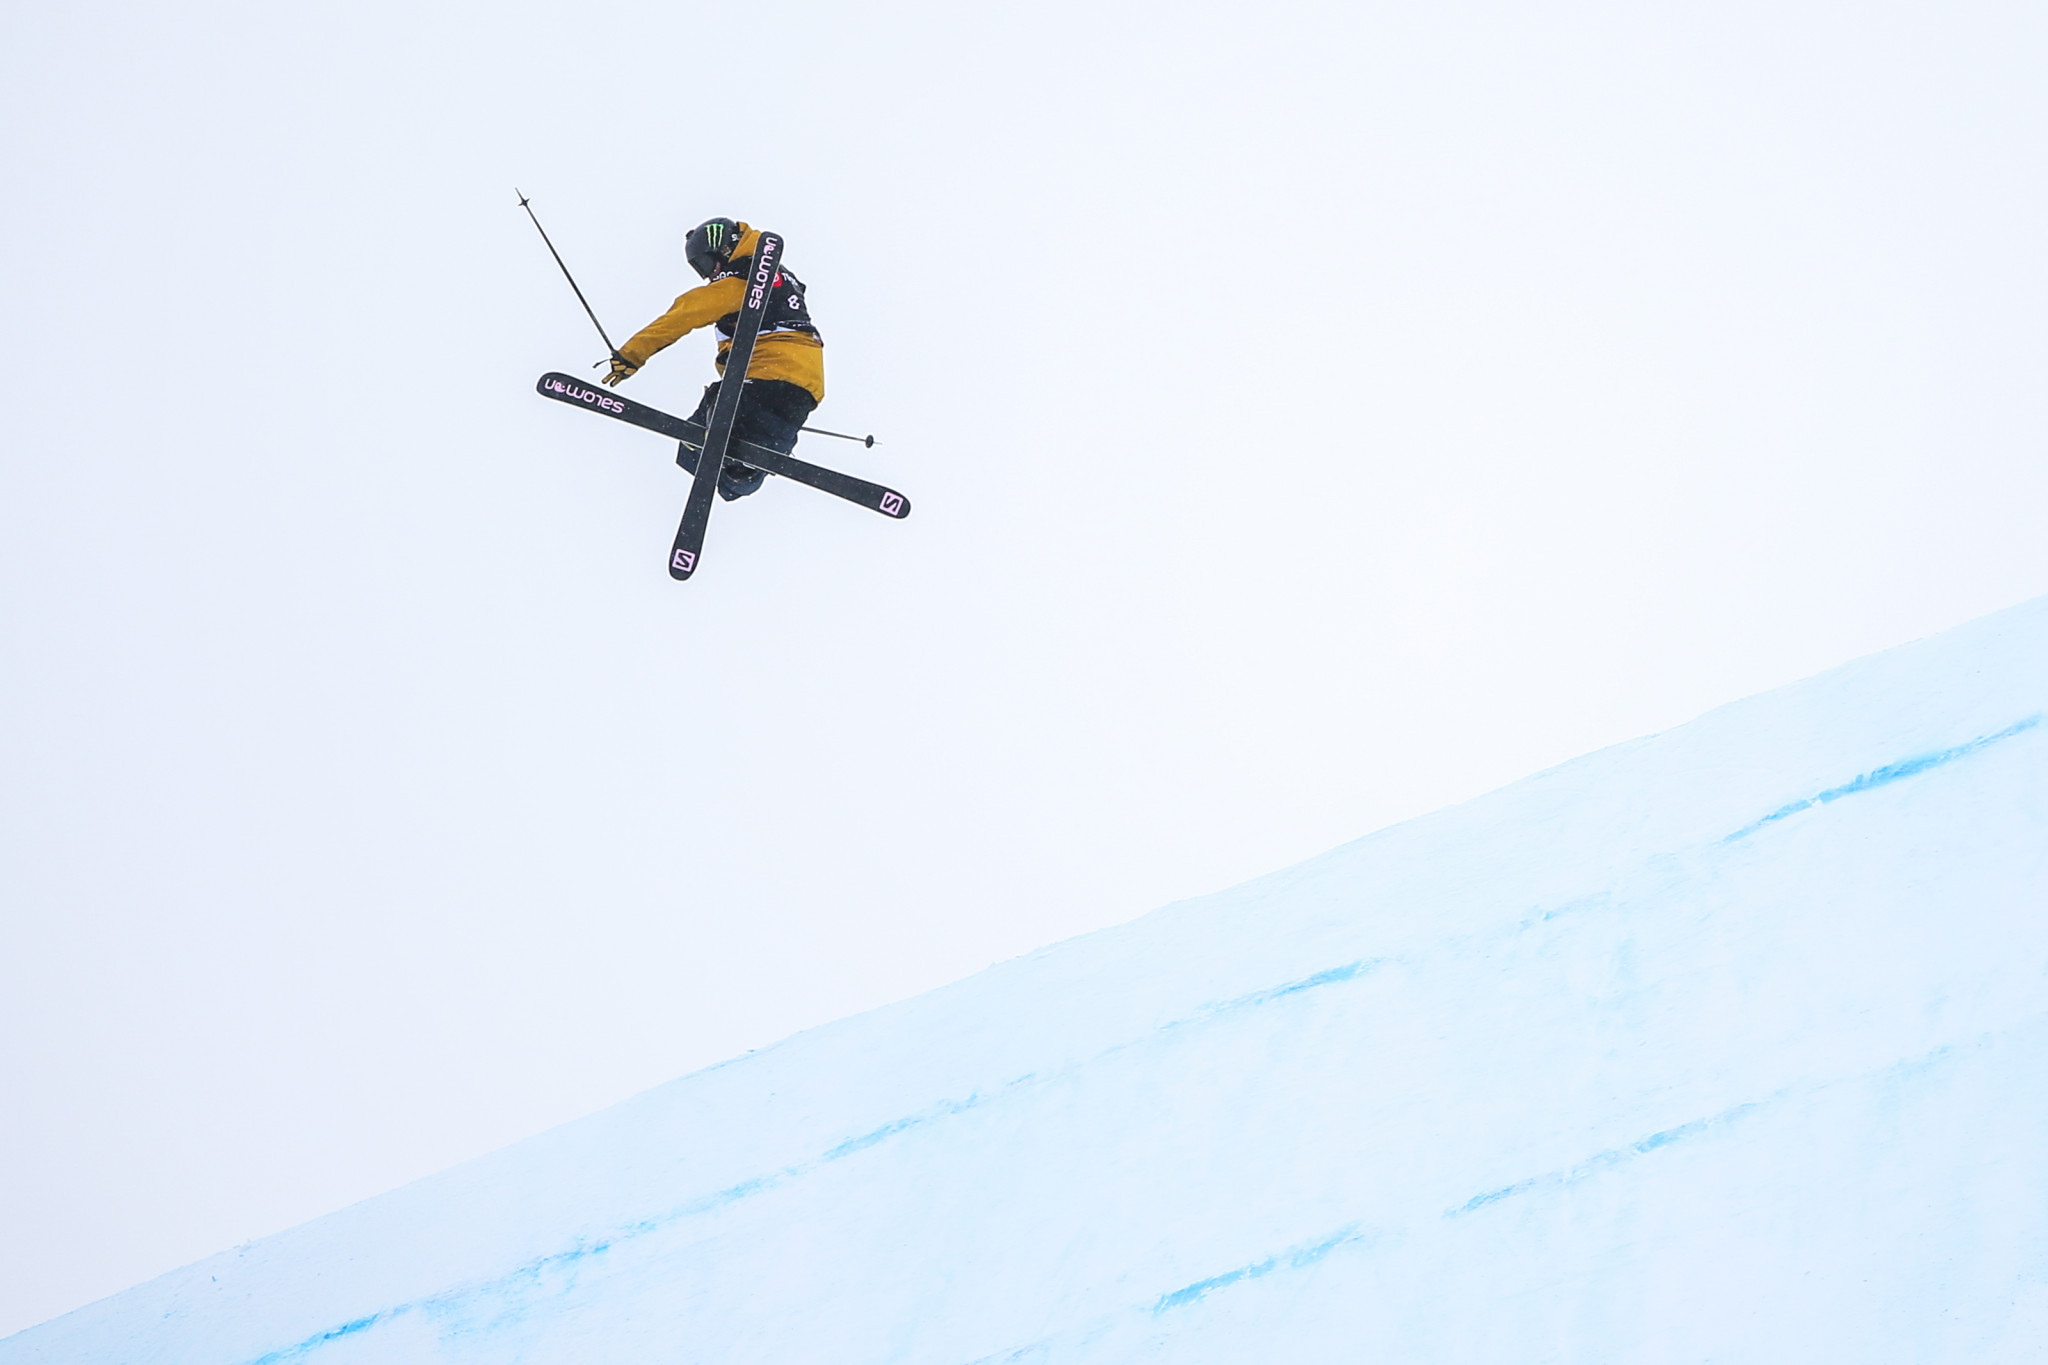 The ski squad is spearheaded by slopestyle world champion James Woods ©Getty Images